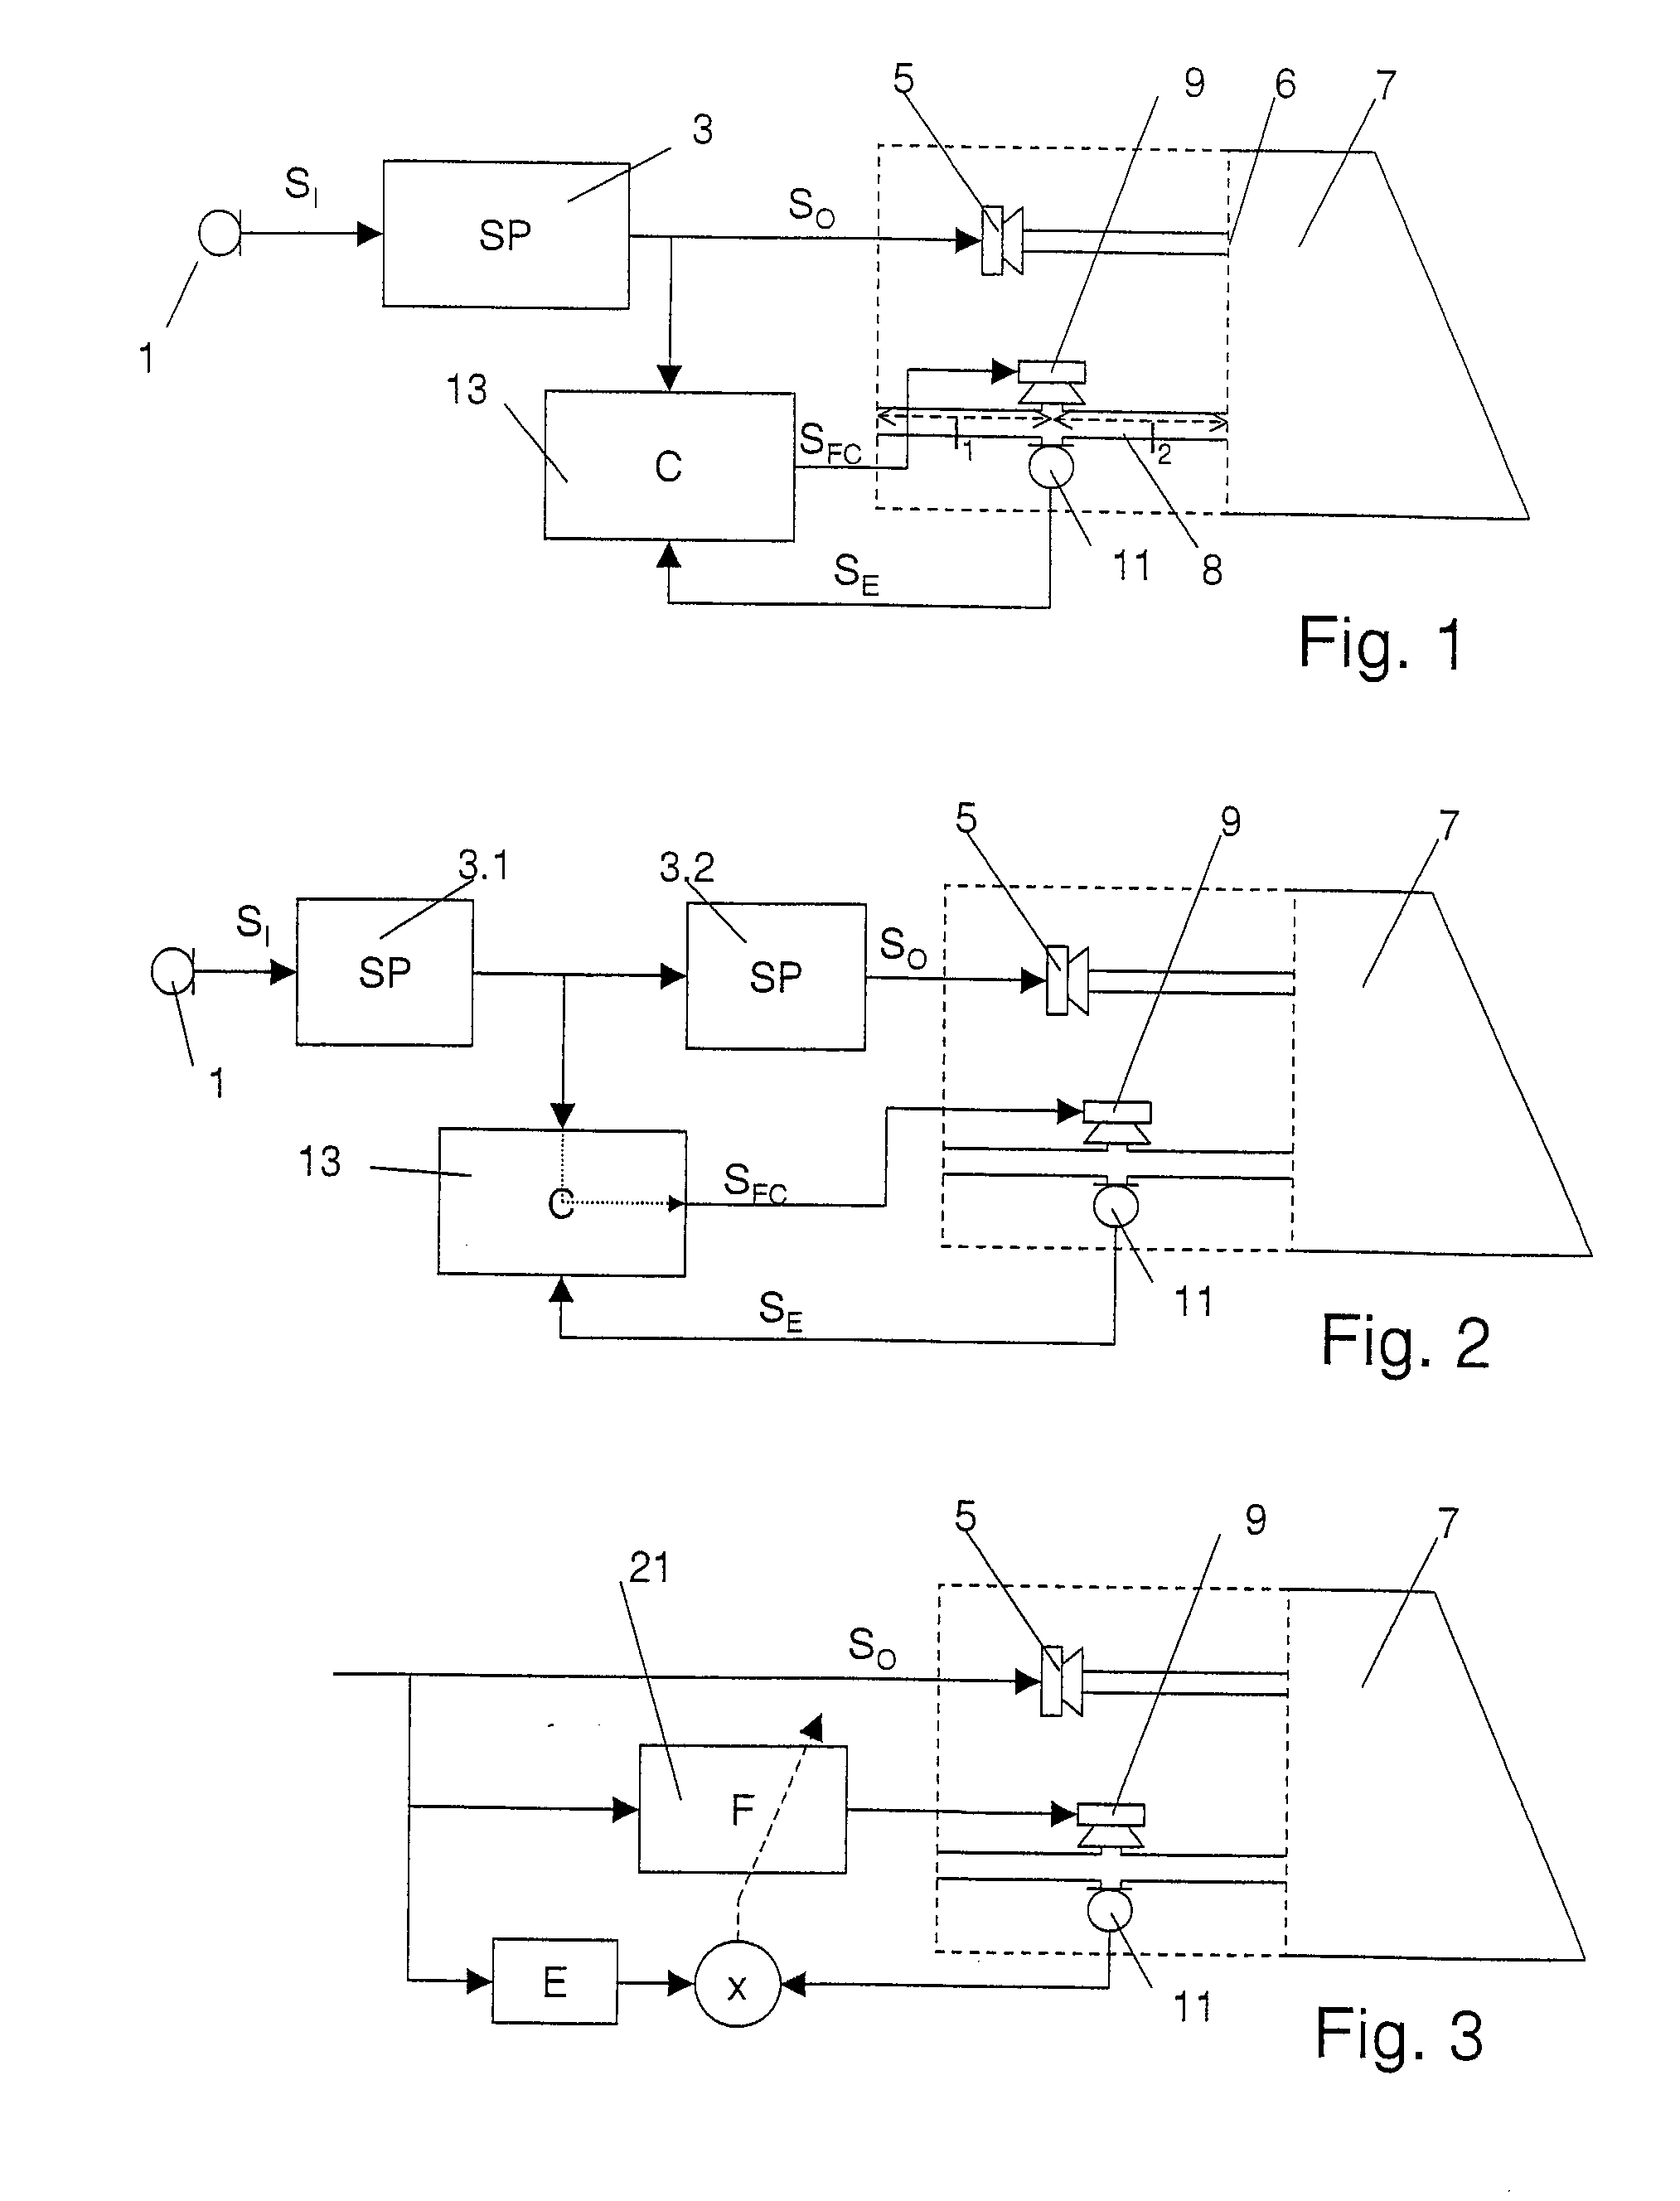 Hearing instrument, and a method of operating a hearing instrument